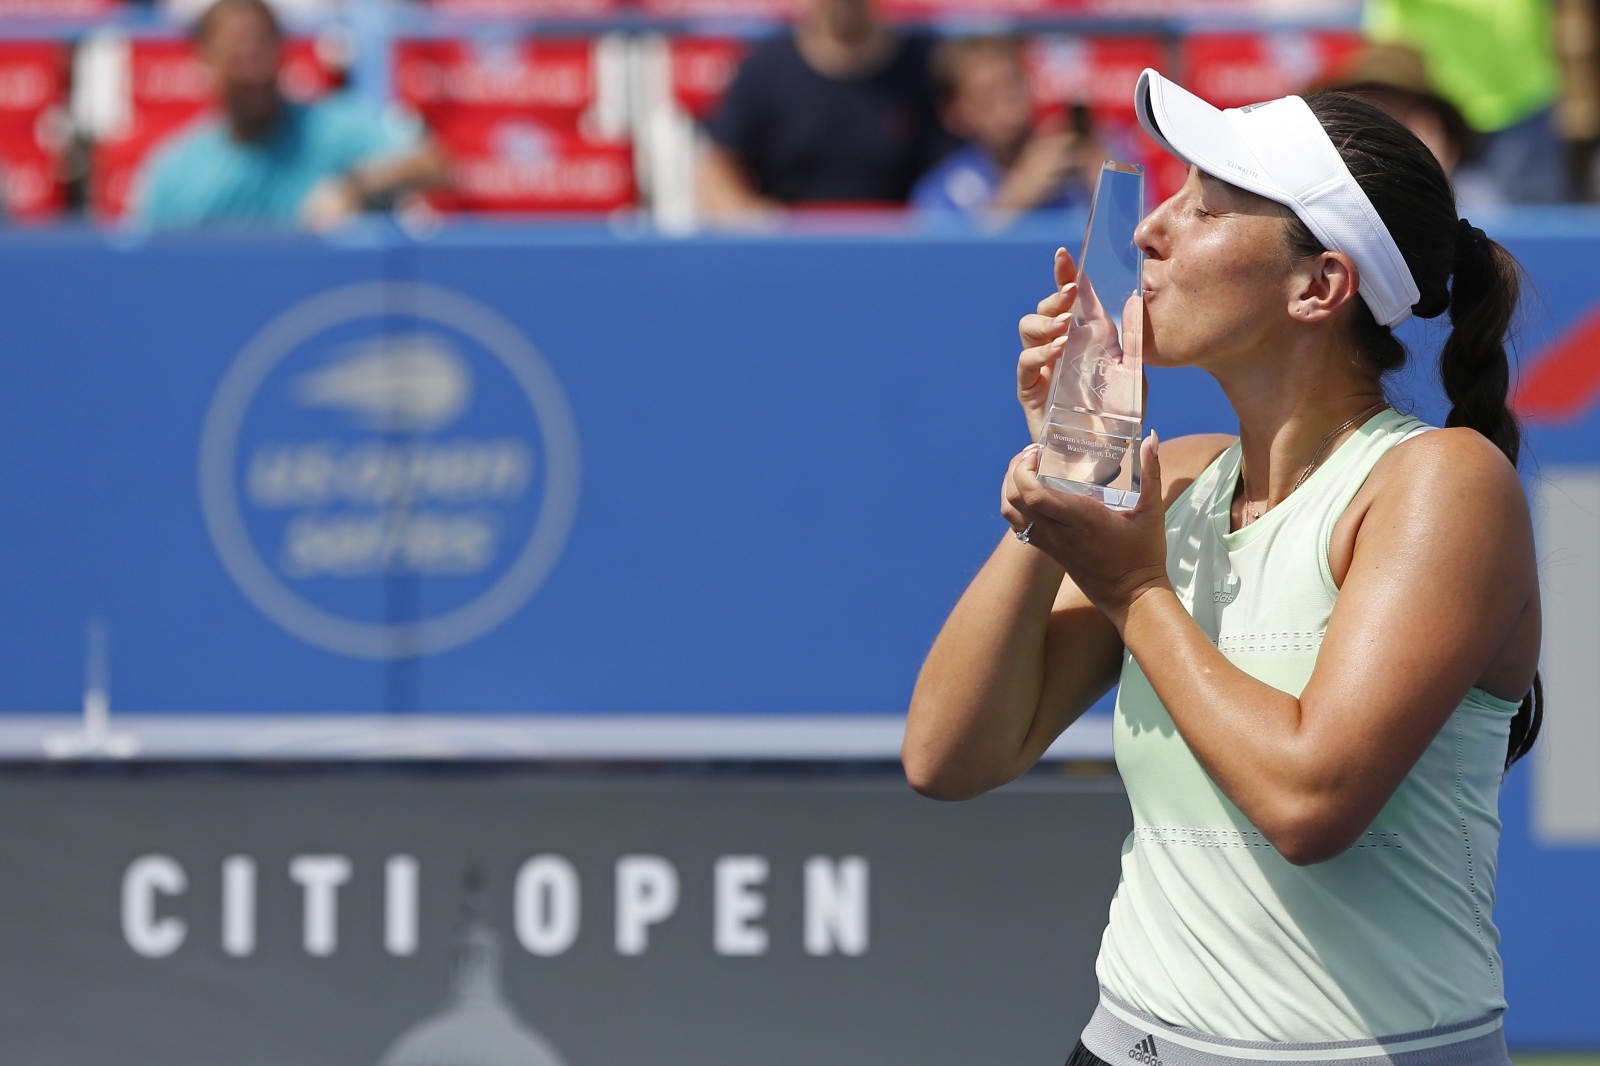 Tennis: Citi Open Aug 4, 2019; Washington, D.C., USA; Jessica Pegula of the United States kisses the championship trophy after her match against Camila Giorgi of Italy (not pictured) in the womenÕs singles final at William H.G. FitzGerald Tennis Center. Mandatory Credit: Geoff Burke-USA TODAY Sports Geoff Burke